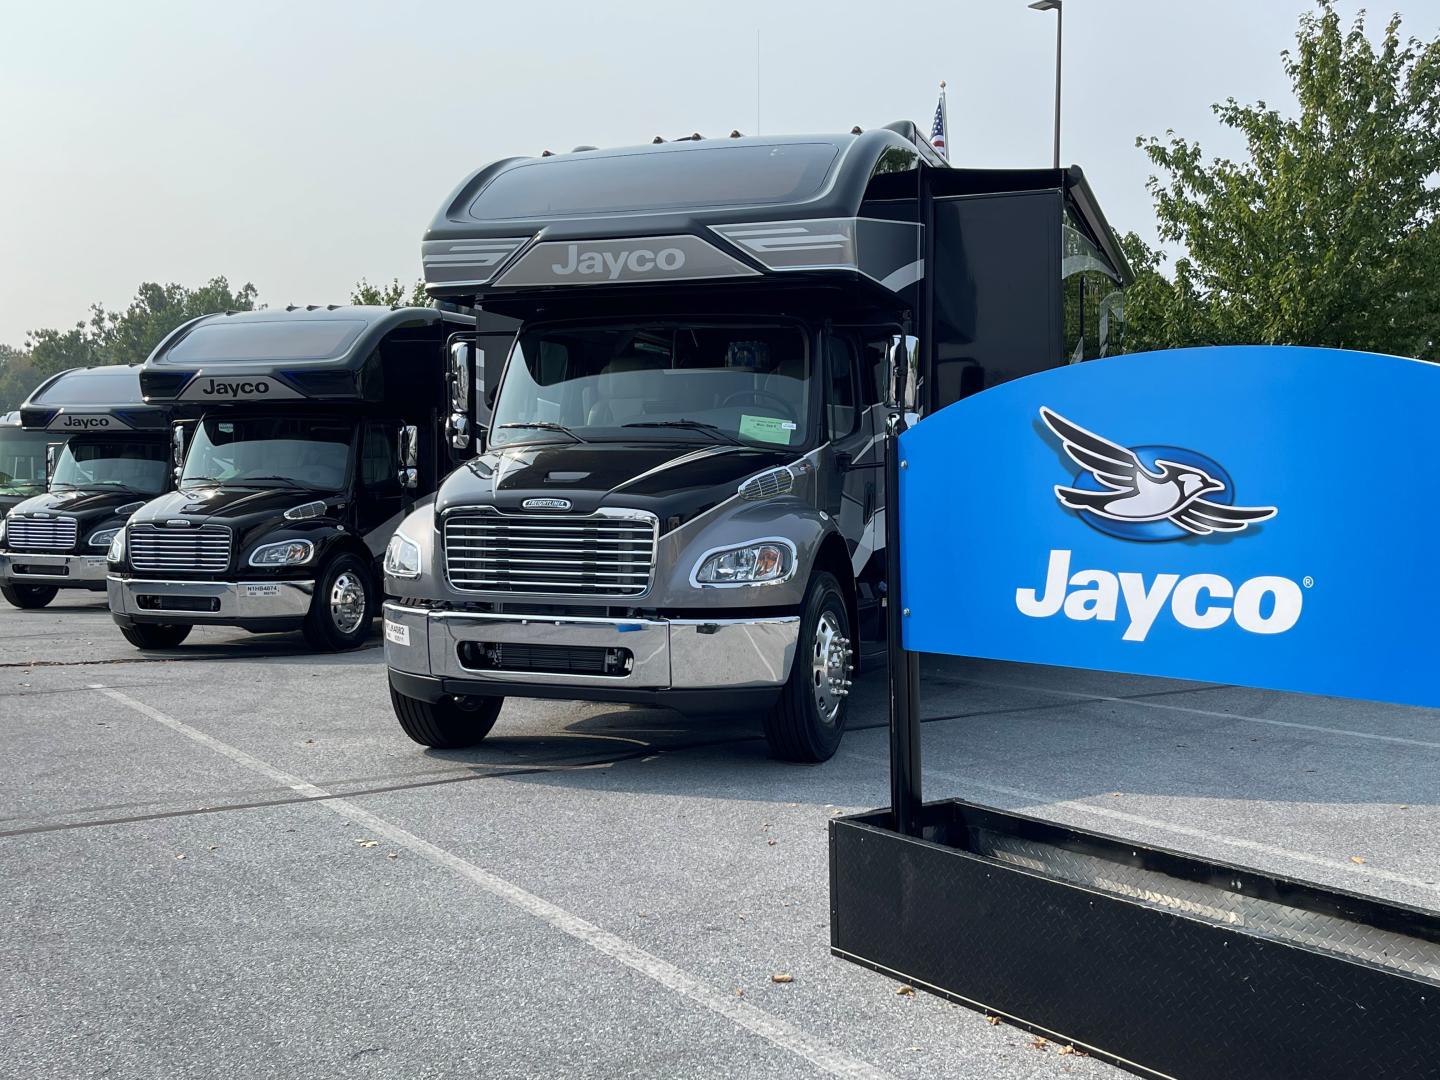 Jayco® 2022 Model Year RVs for Sale at America’s Largest RV Show®